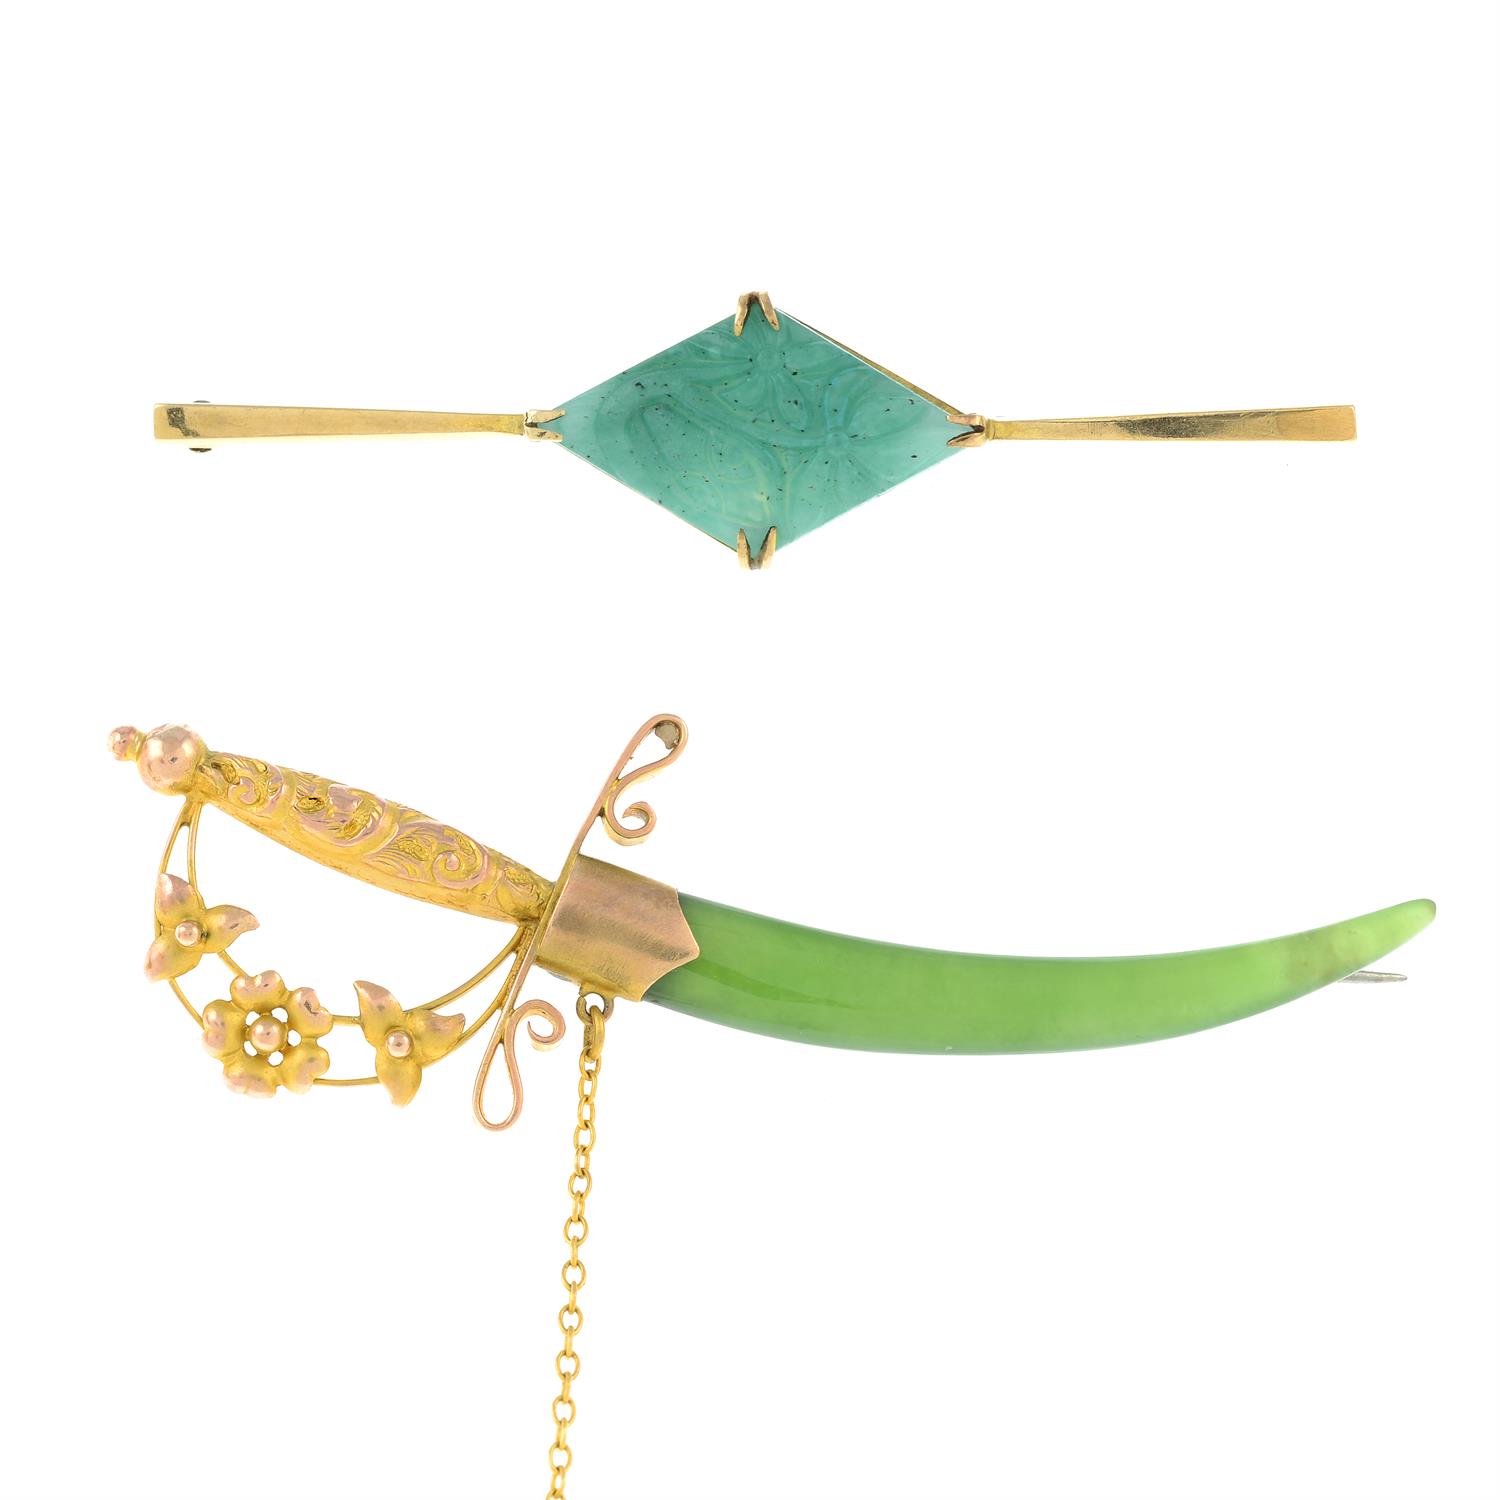 A late 19th century 9ct gold nephrite sword brooch, and an early 20th century gem-set brooch.